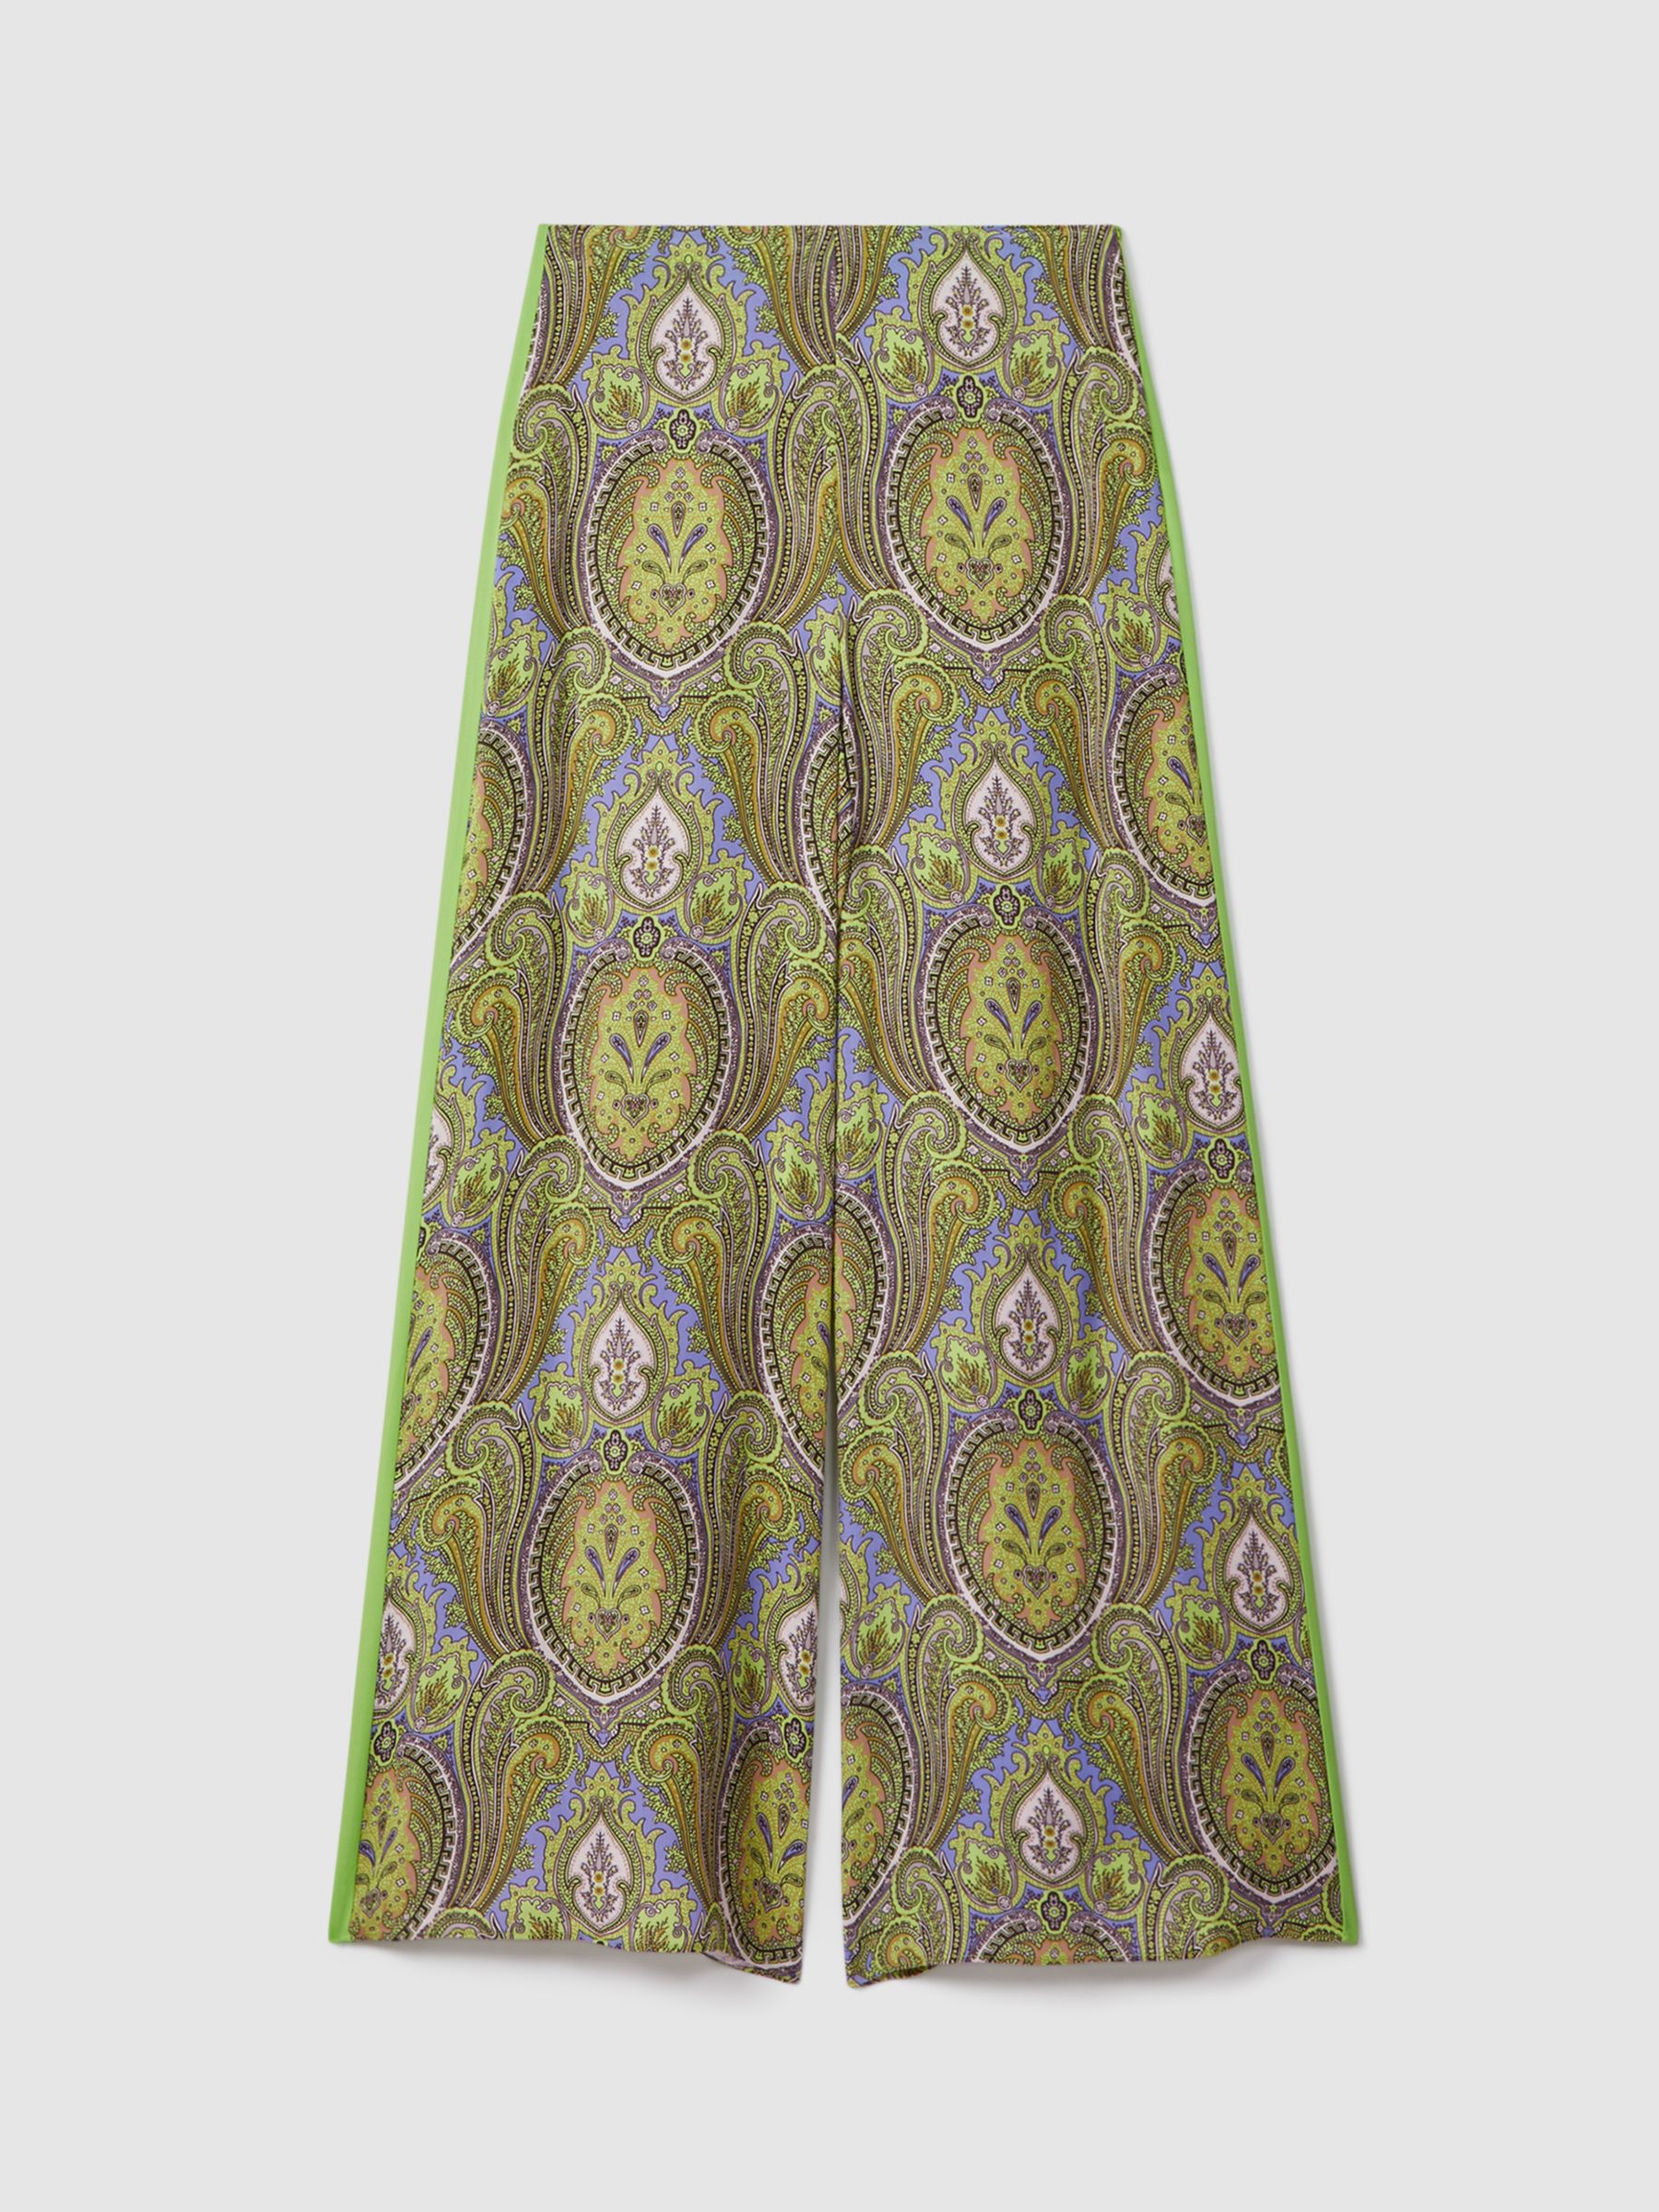 Buy FLORERE Paisley Print Wide Leg Trousers, Lime Green/Multi Online at johnlewis.com